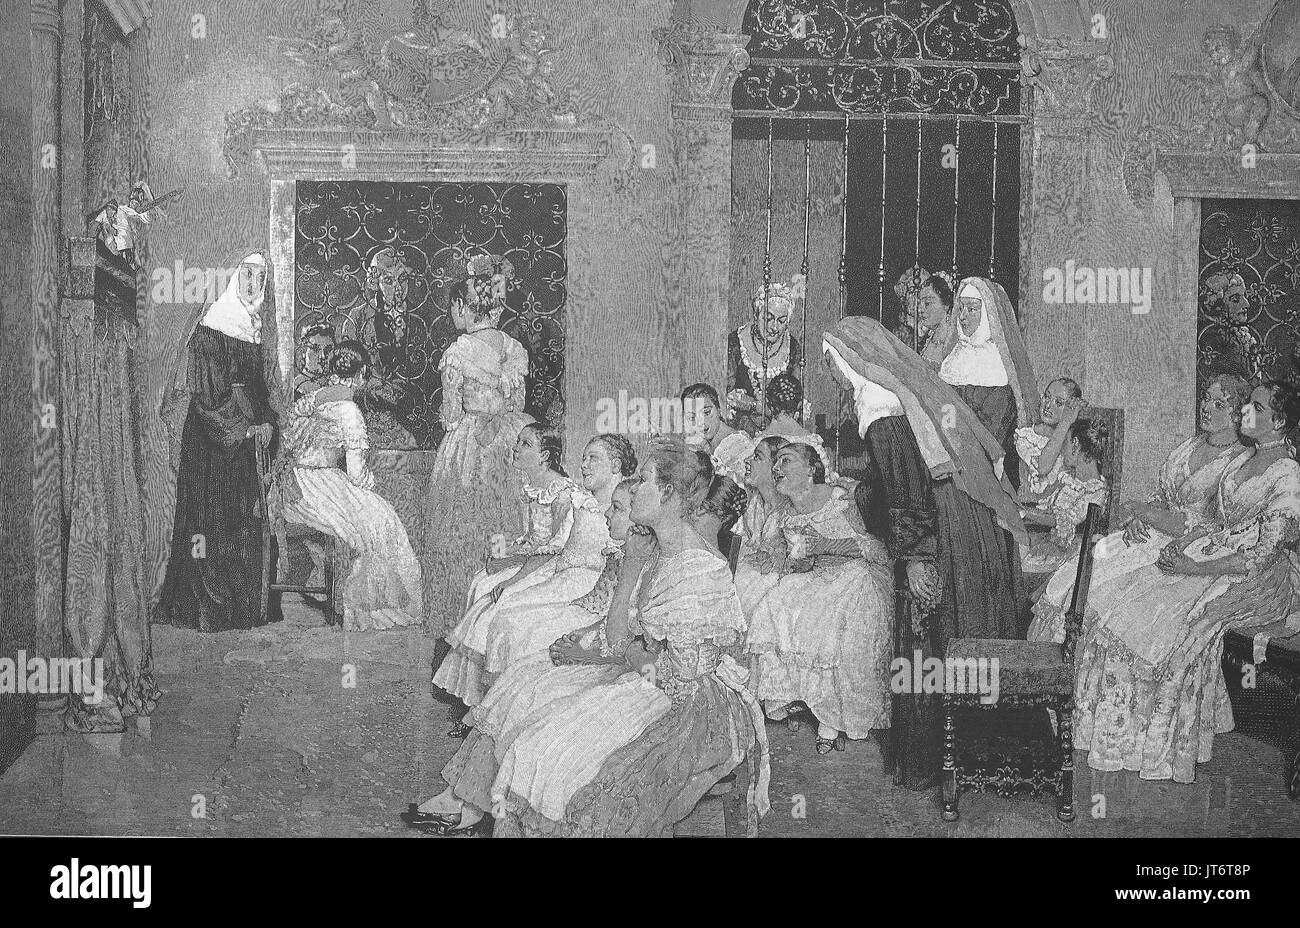 Puppet theater in the monastery, at the first international art exhibition in the artist's home was held from 1 April to 30 September 1882 at Vienna, Austria, Digital improved reproduction of an image published between 1880 - 1885 Stock Photo